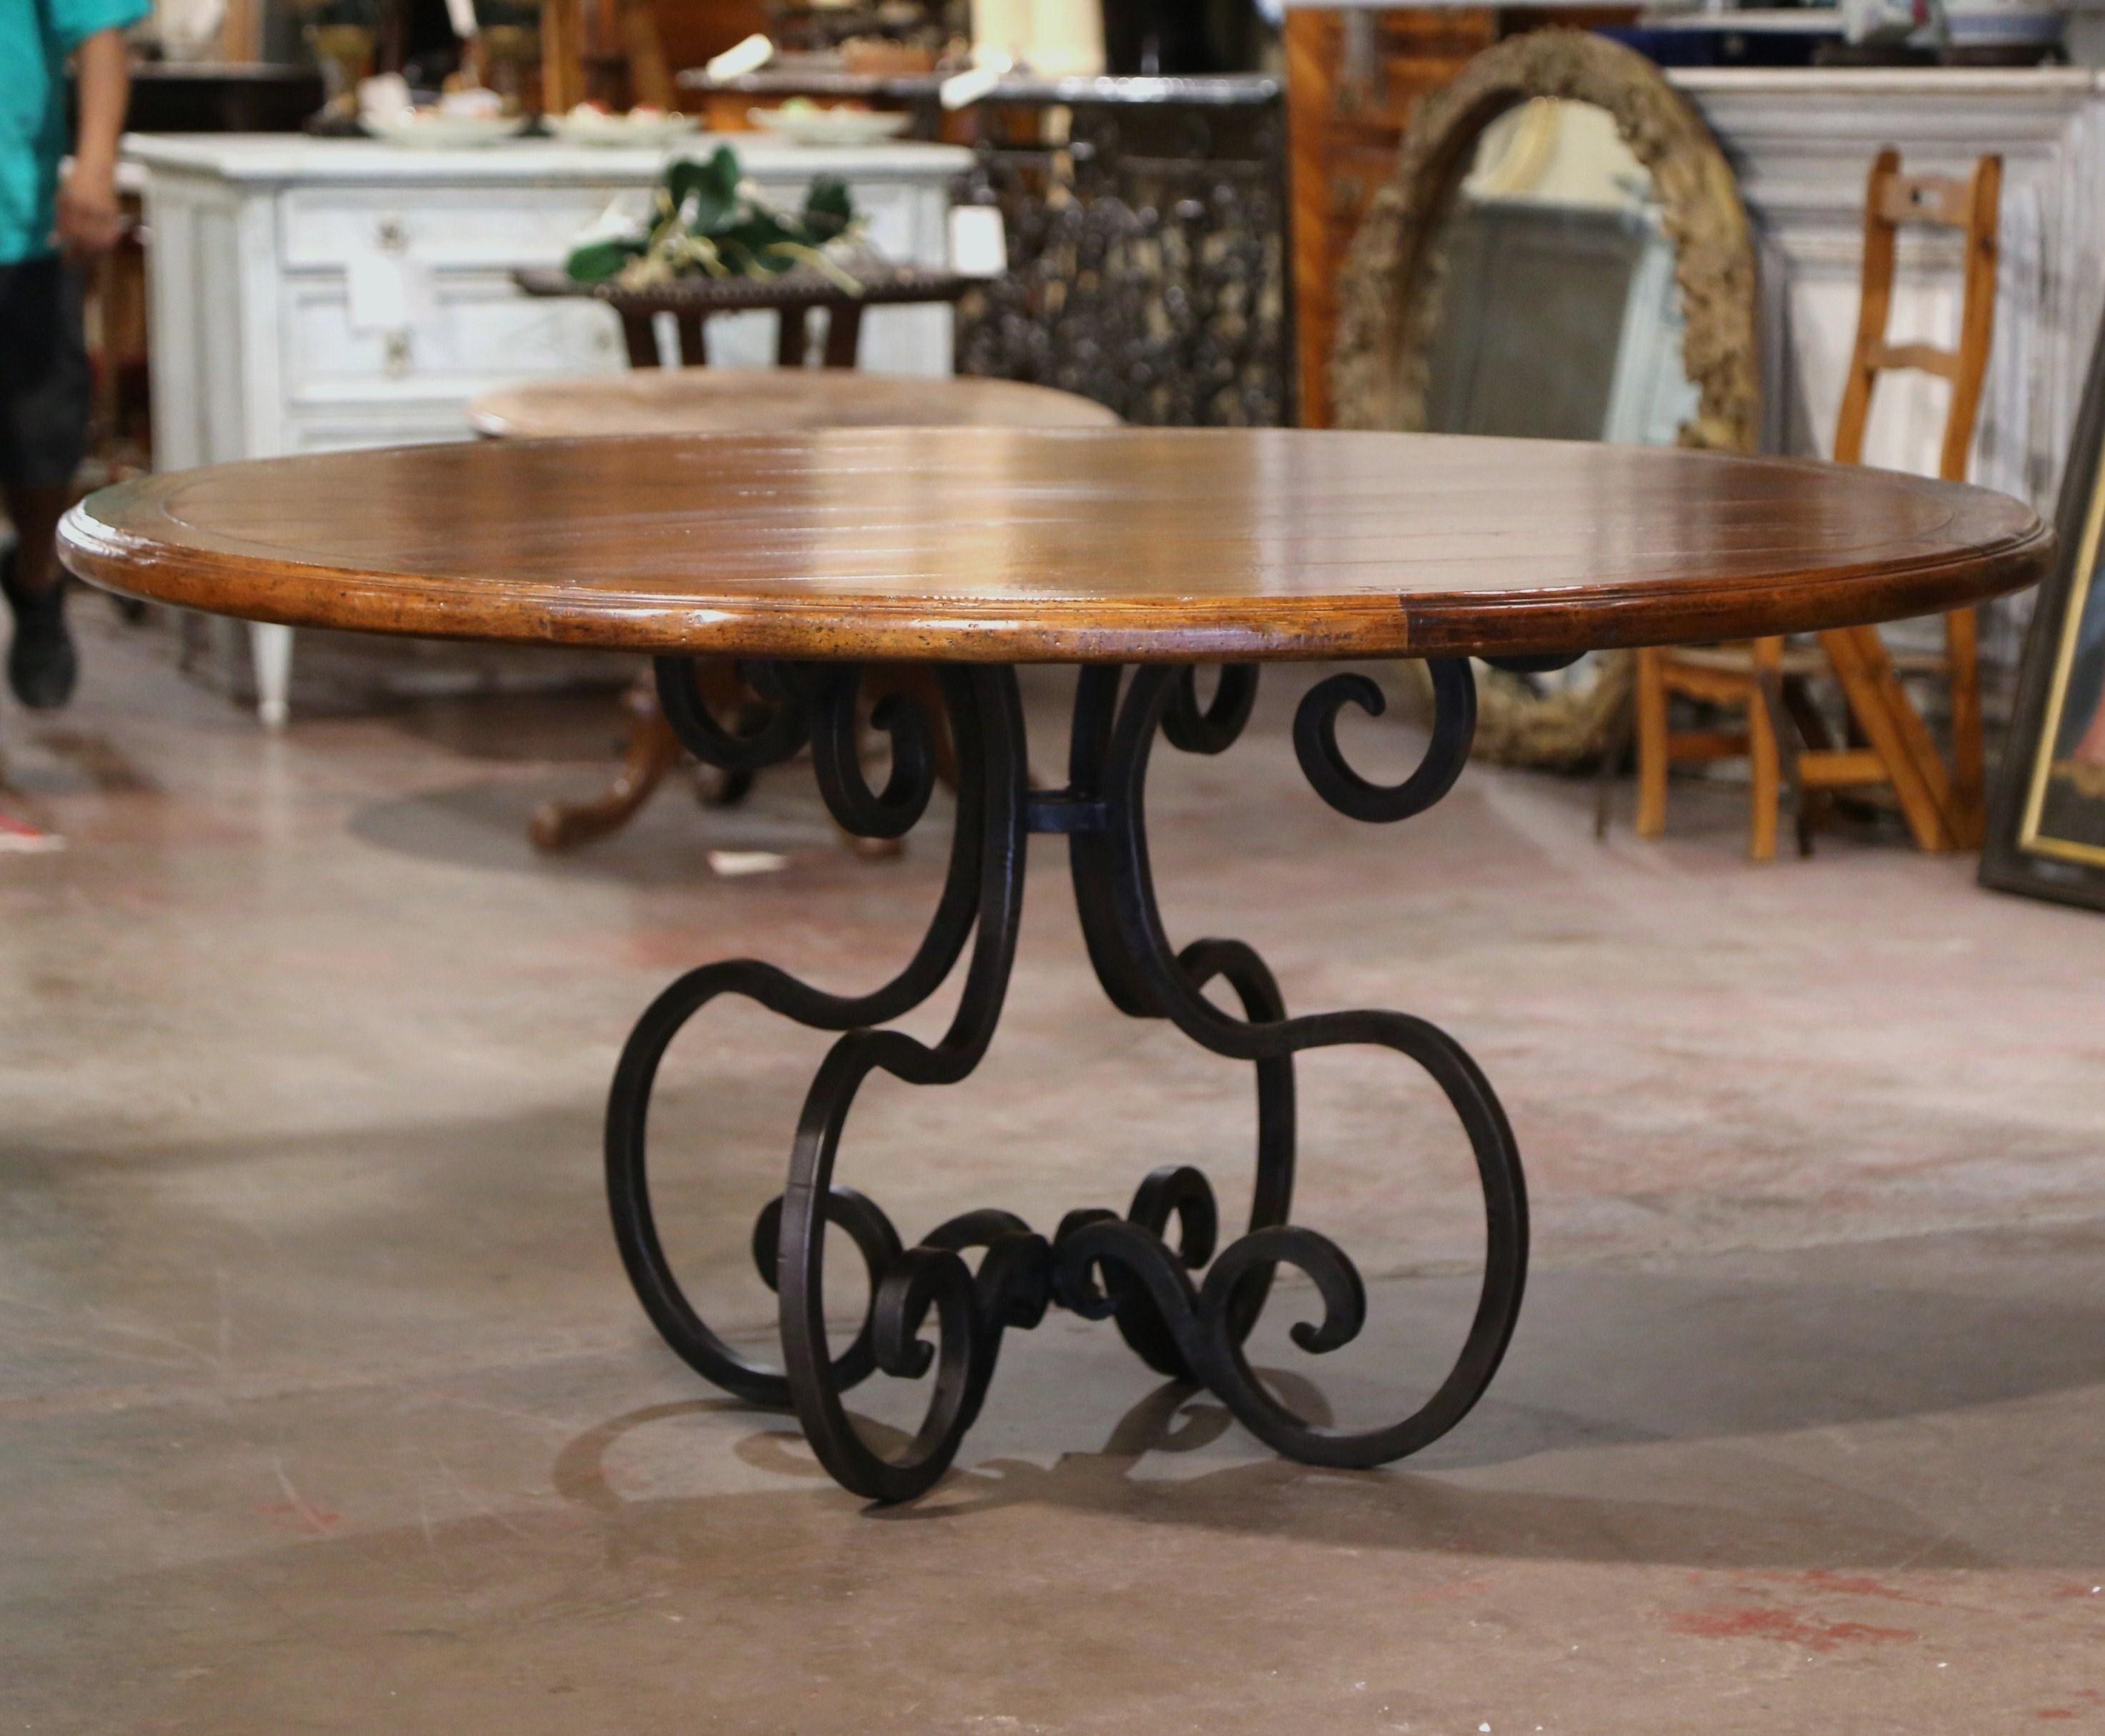 Crafted in the USA circa 1980, the elegant table stands on forged wrought iron base with scrolled legs. Almost 5 feet in diameter, the circular wooden top features old walnut planks set inside a round frame. The large round table is in excellent